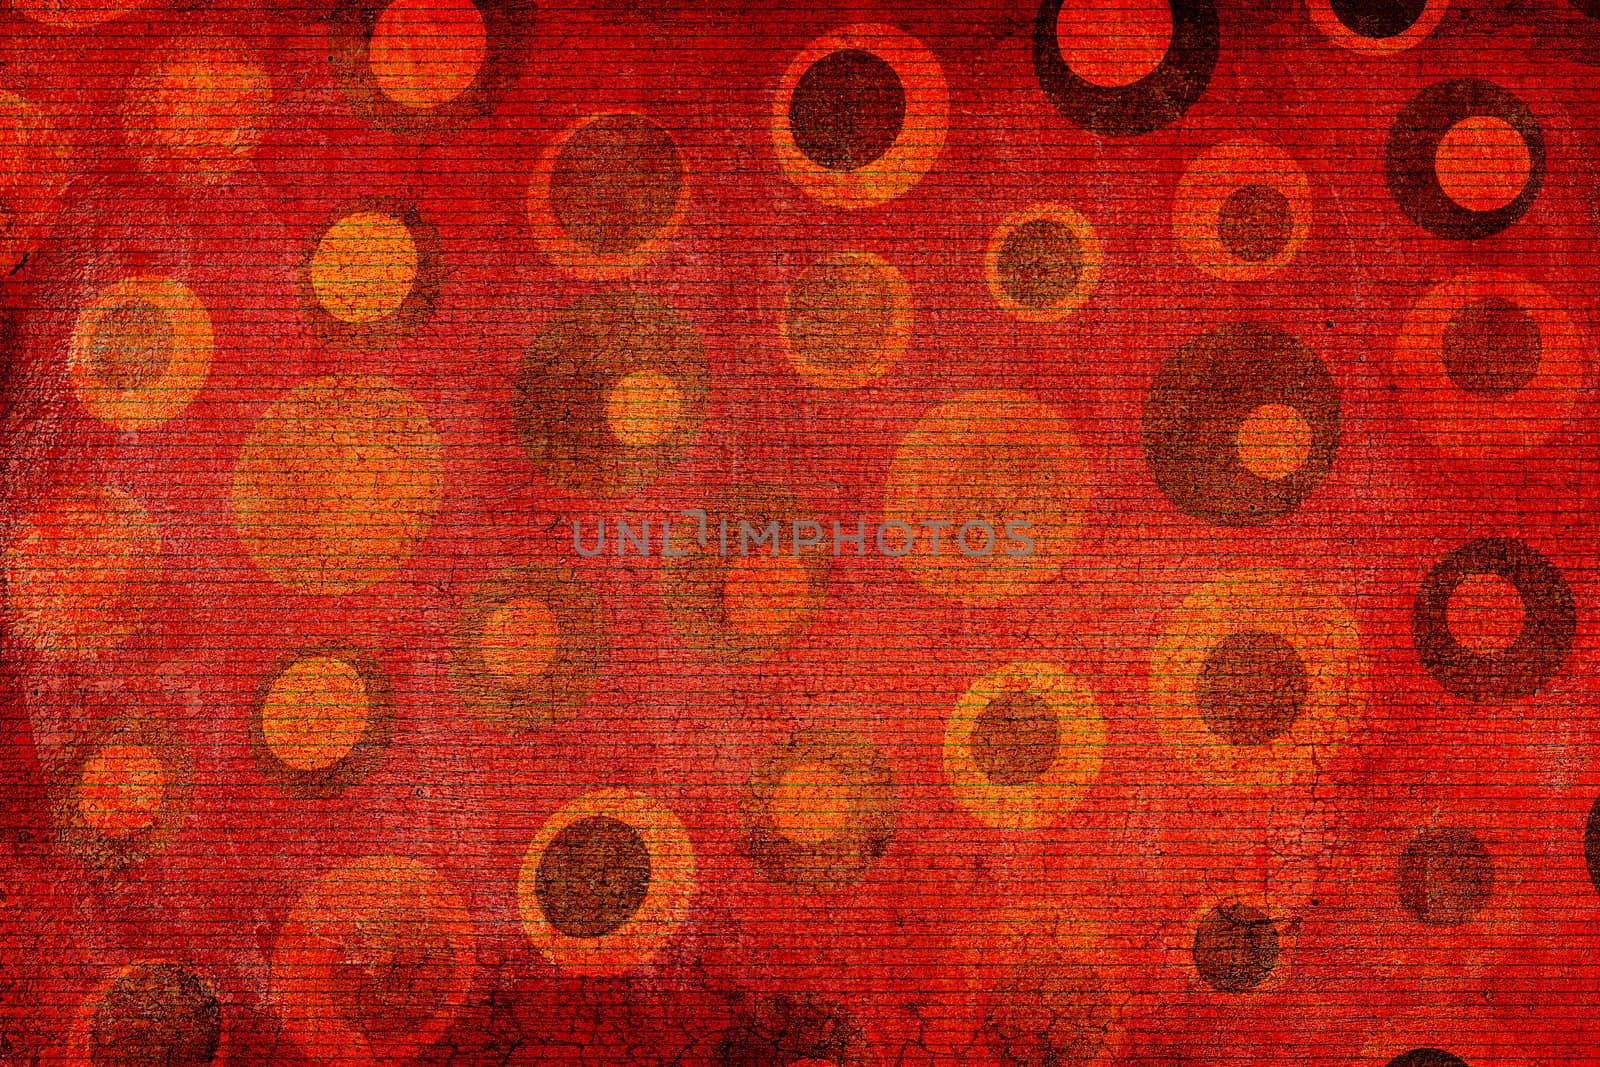 Red, Orange and Brown Dots Texture With Lines by MaxalTamor